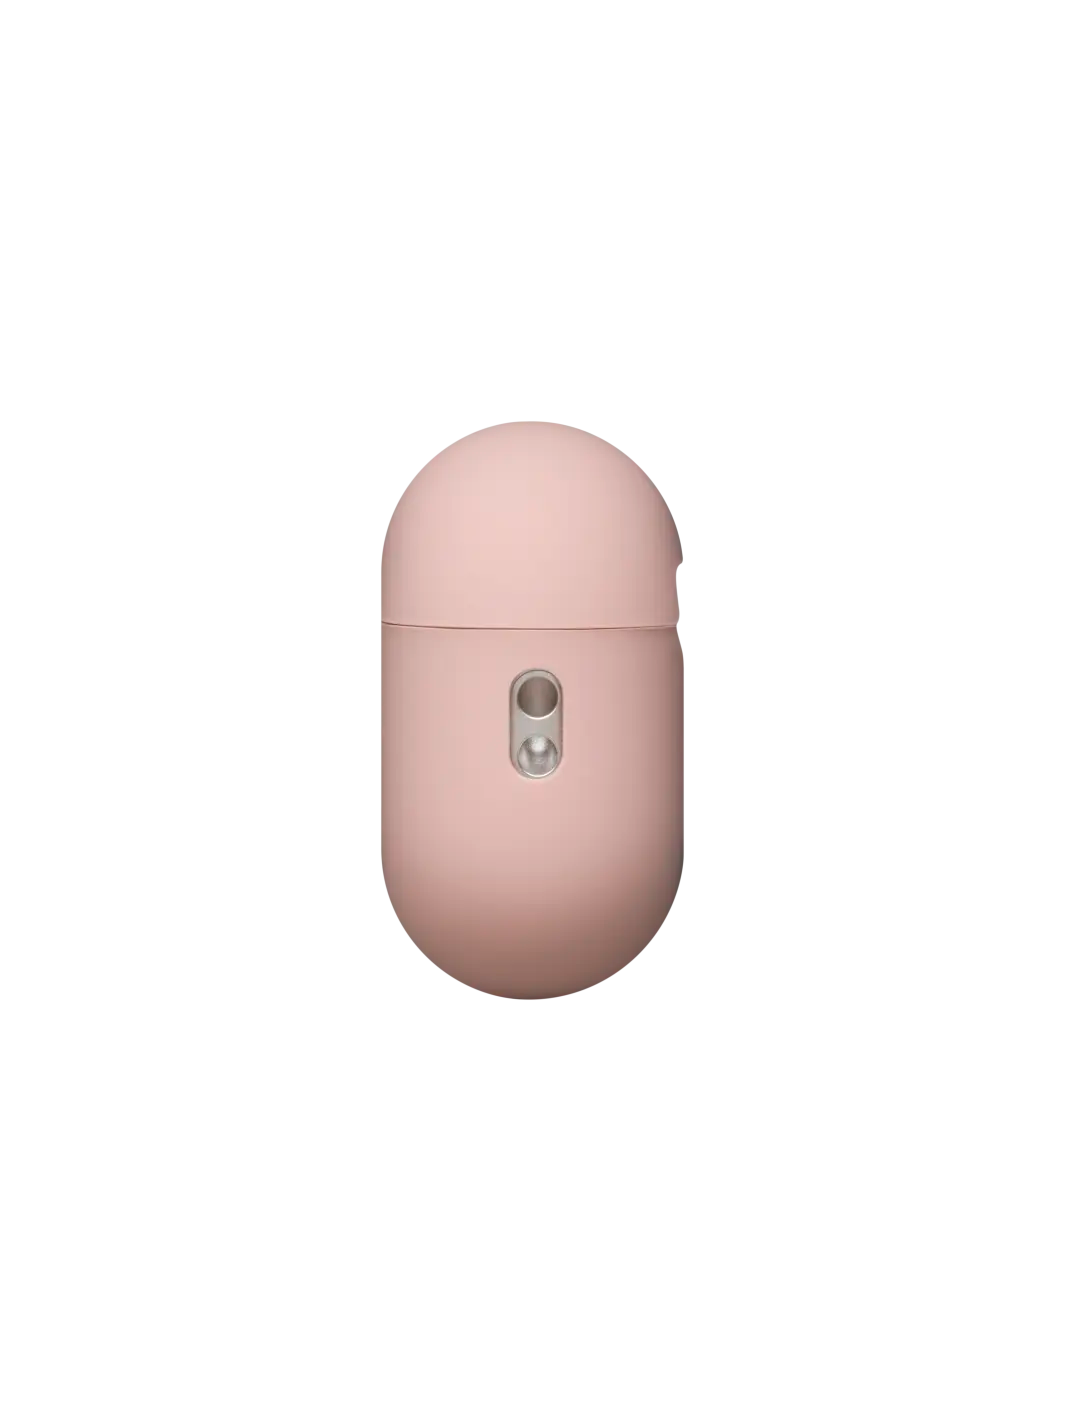 Costa Rica AirPods case Pink Sand AirPods Pro (2nd gen) AirPods accessories